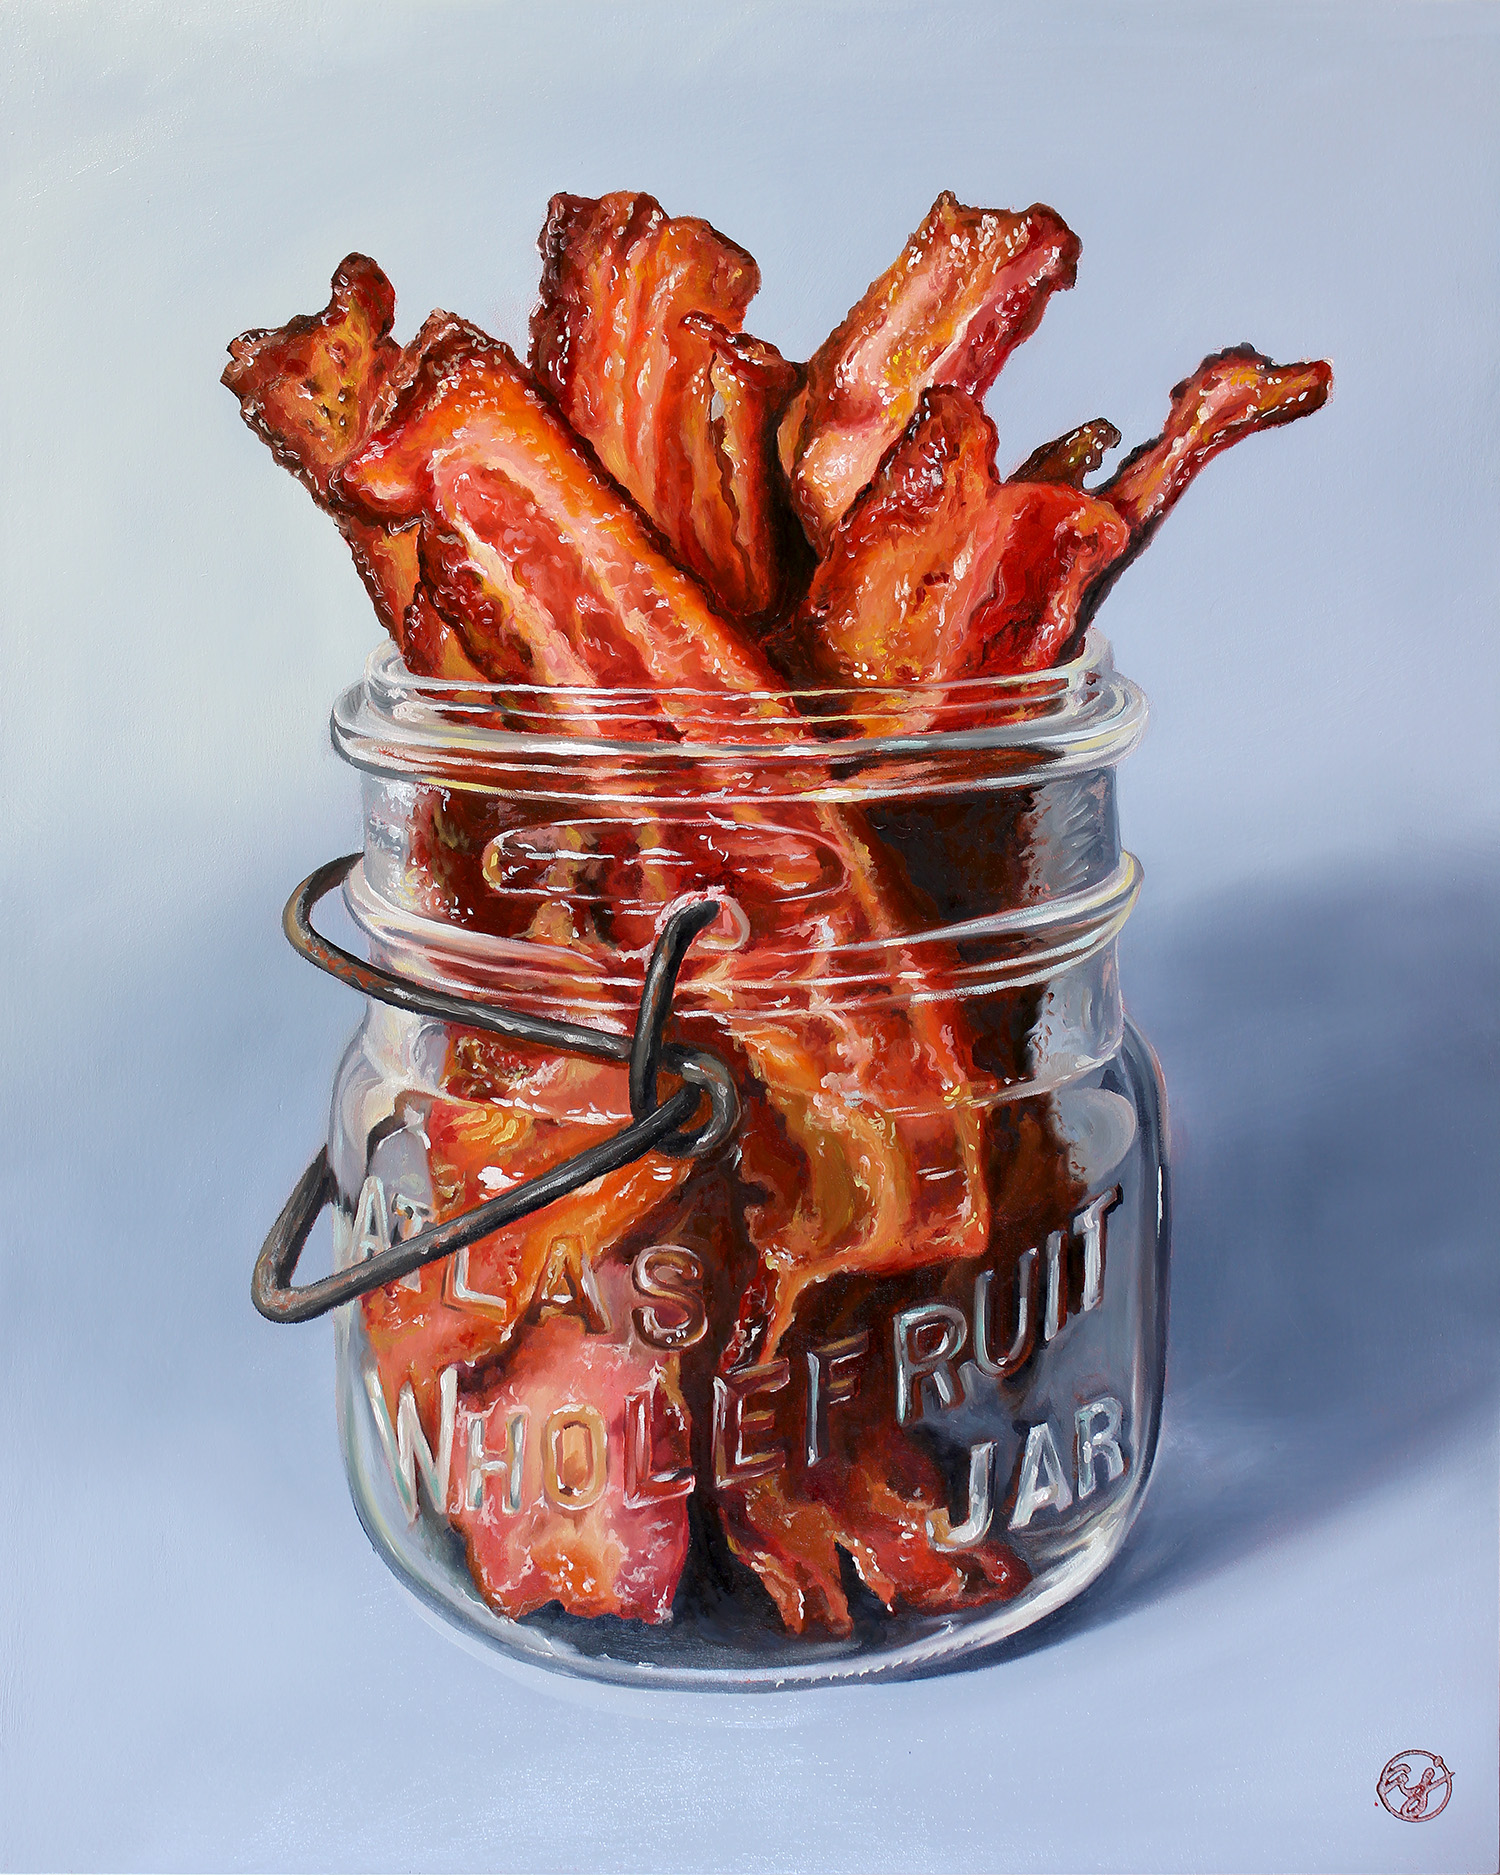 "Bacon Me Crazy" 16x20 Original Oil Painting by Abra Johnson